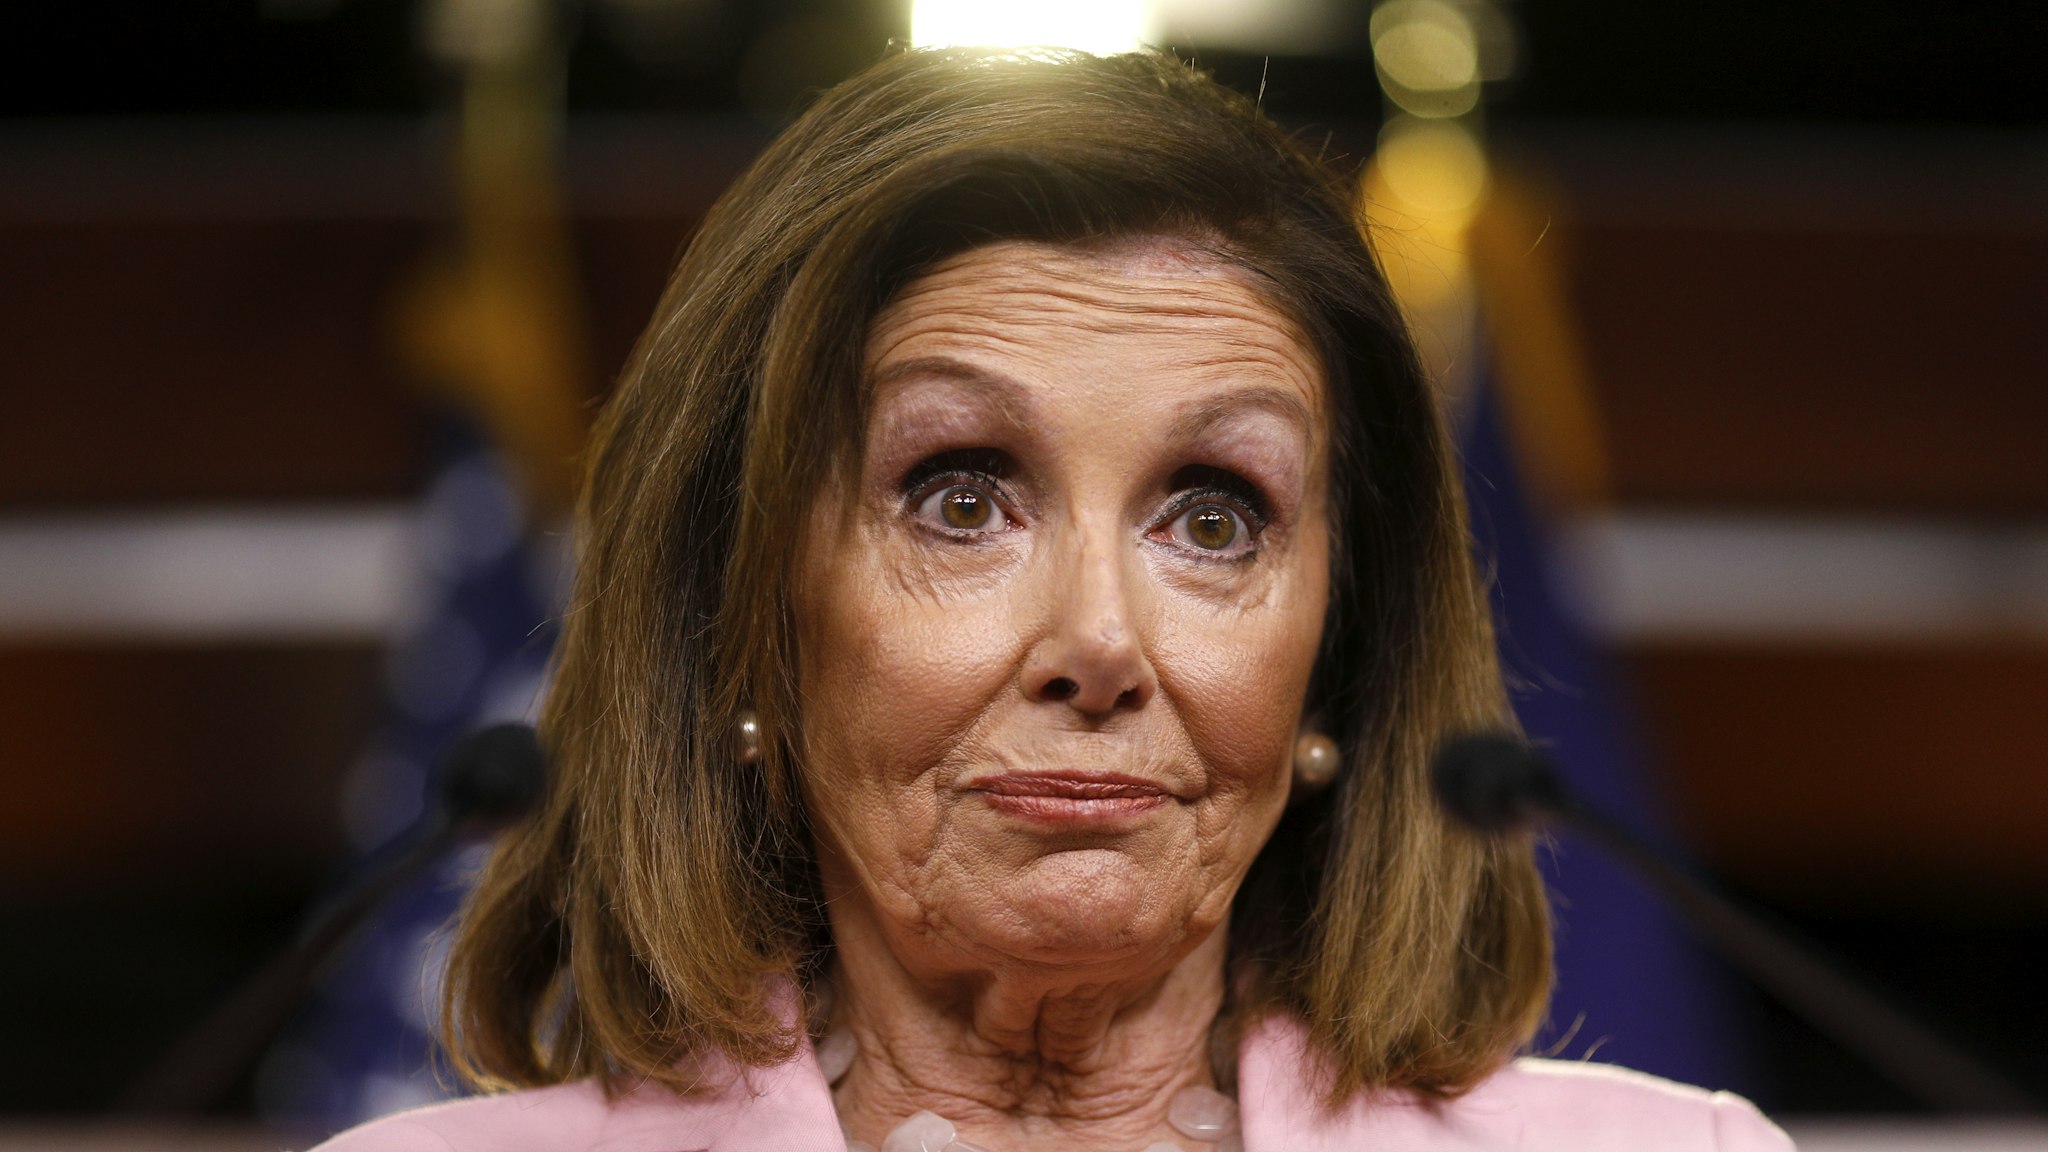 WASHINGTON, DC - SEPTEMBER 12: U.S. House Speaker Nancy Pelosi (D-CA) delivers remarks duringher weekly news conference on Capitol Hill September 12, 2019 in Washington, DC. While saying she's "pleased" with progress on a House Judiciary Committee probe of President Donald Trump, she declined to call the investigation an impeachment inquiry as Committee Chairman Jerrold Nadler (D-NY) has done.